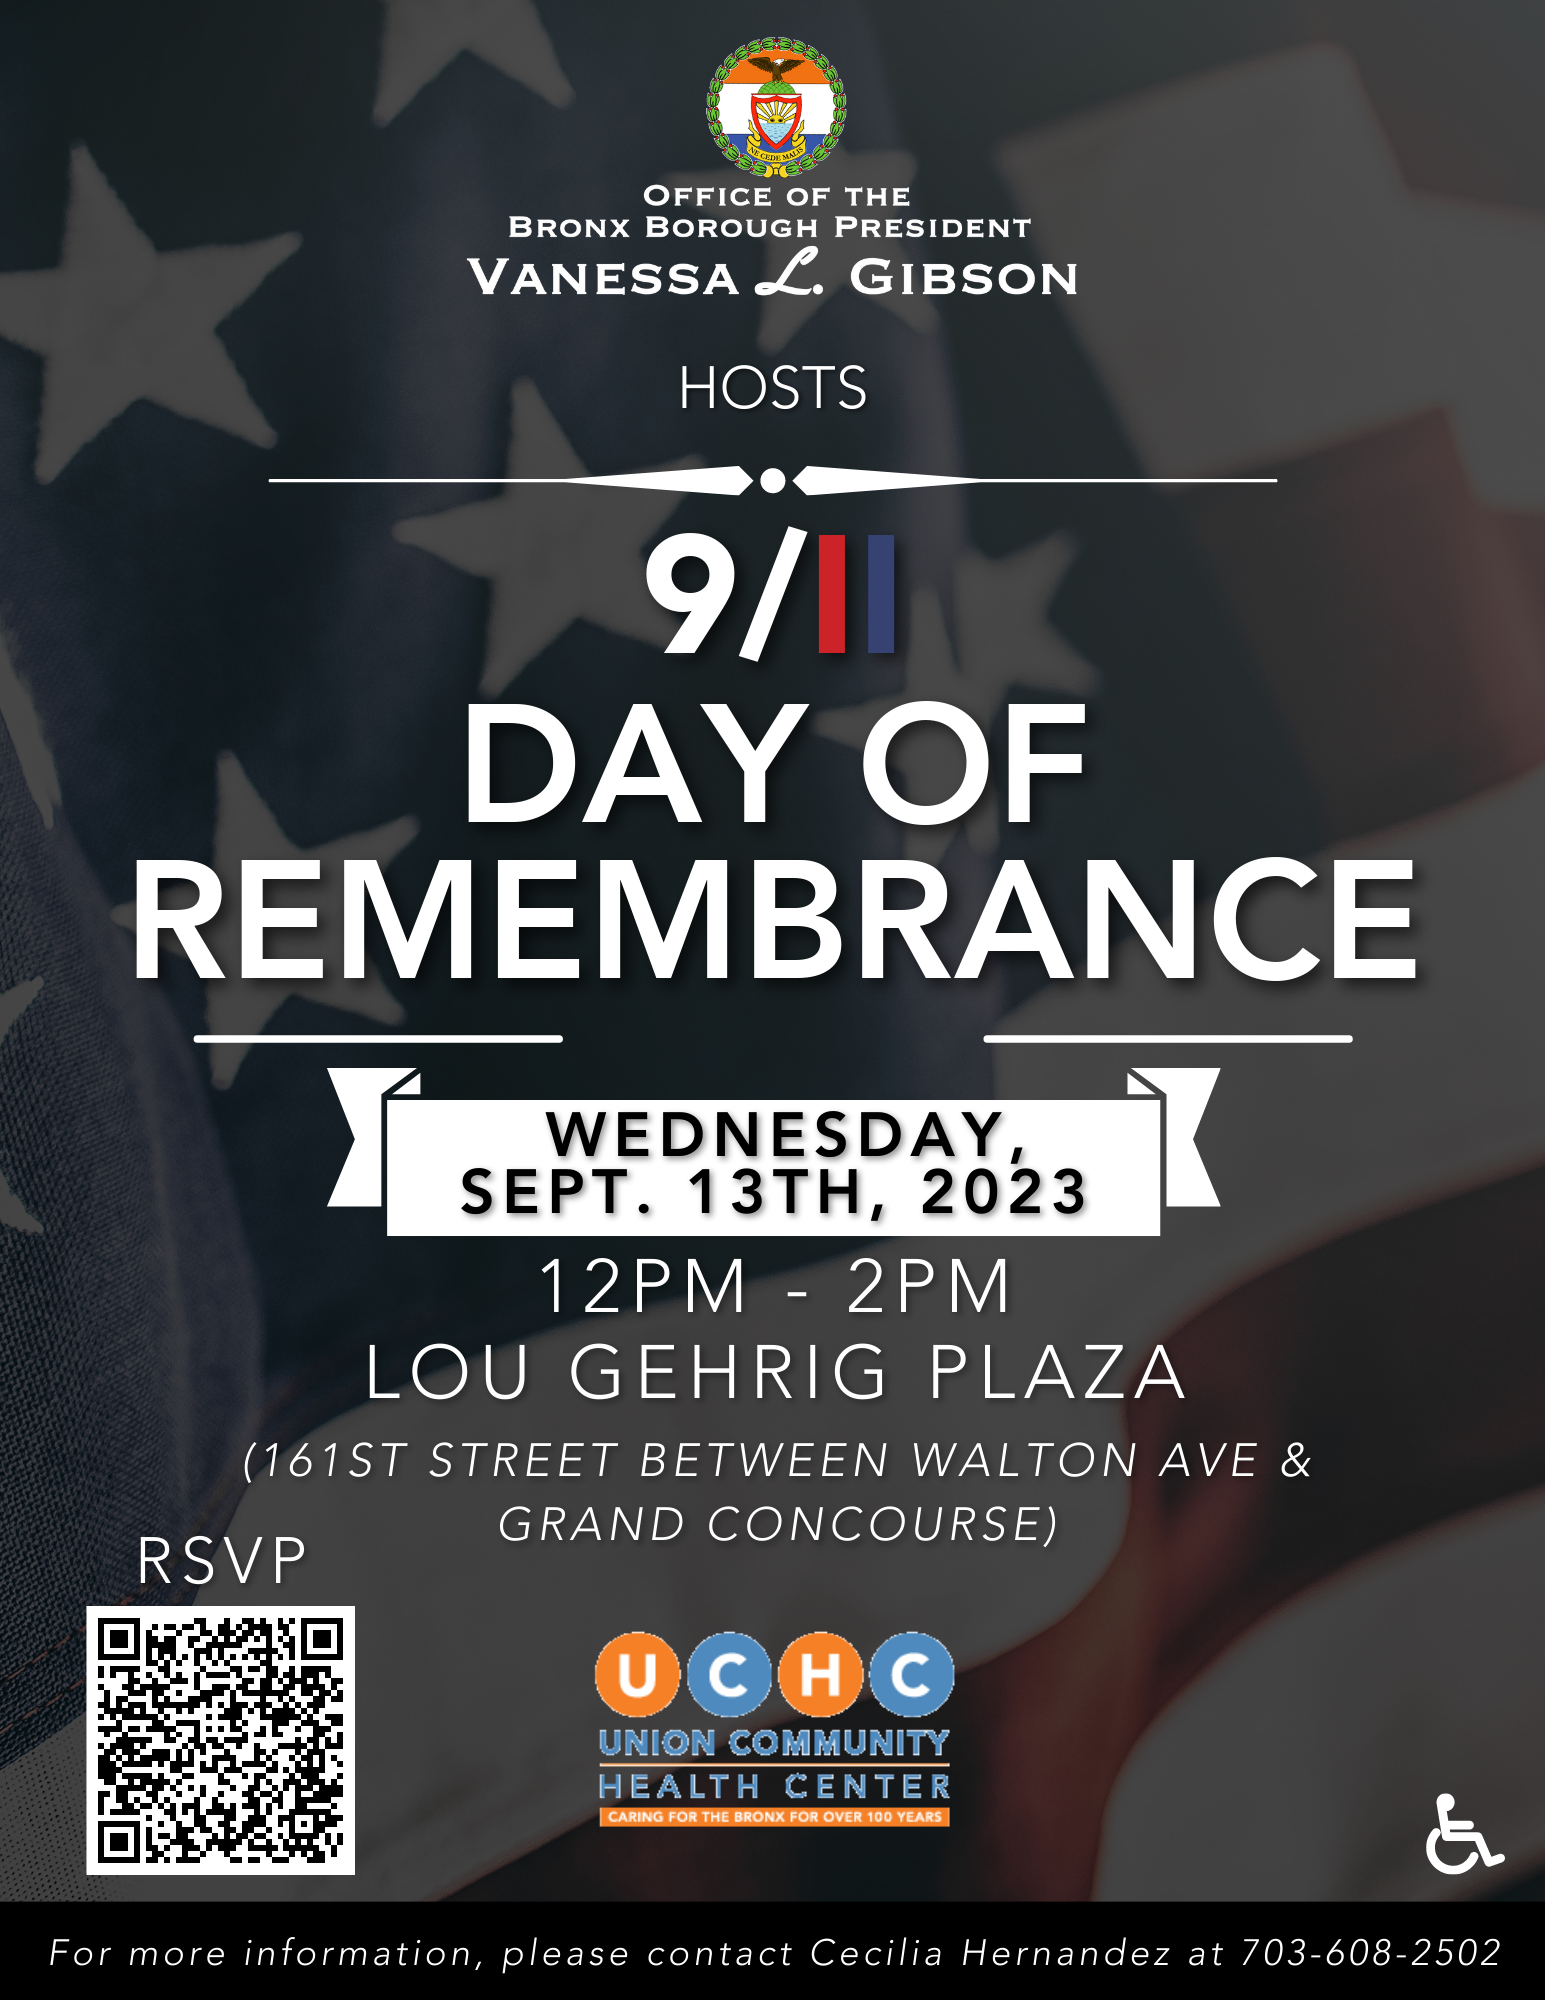 A flyer for the 9/11 Day of Remembrance event on September 13 from 12 PM to 2 PM.